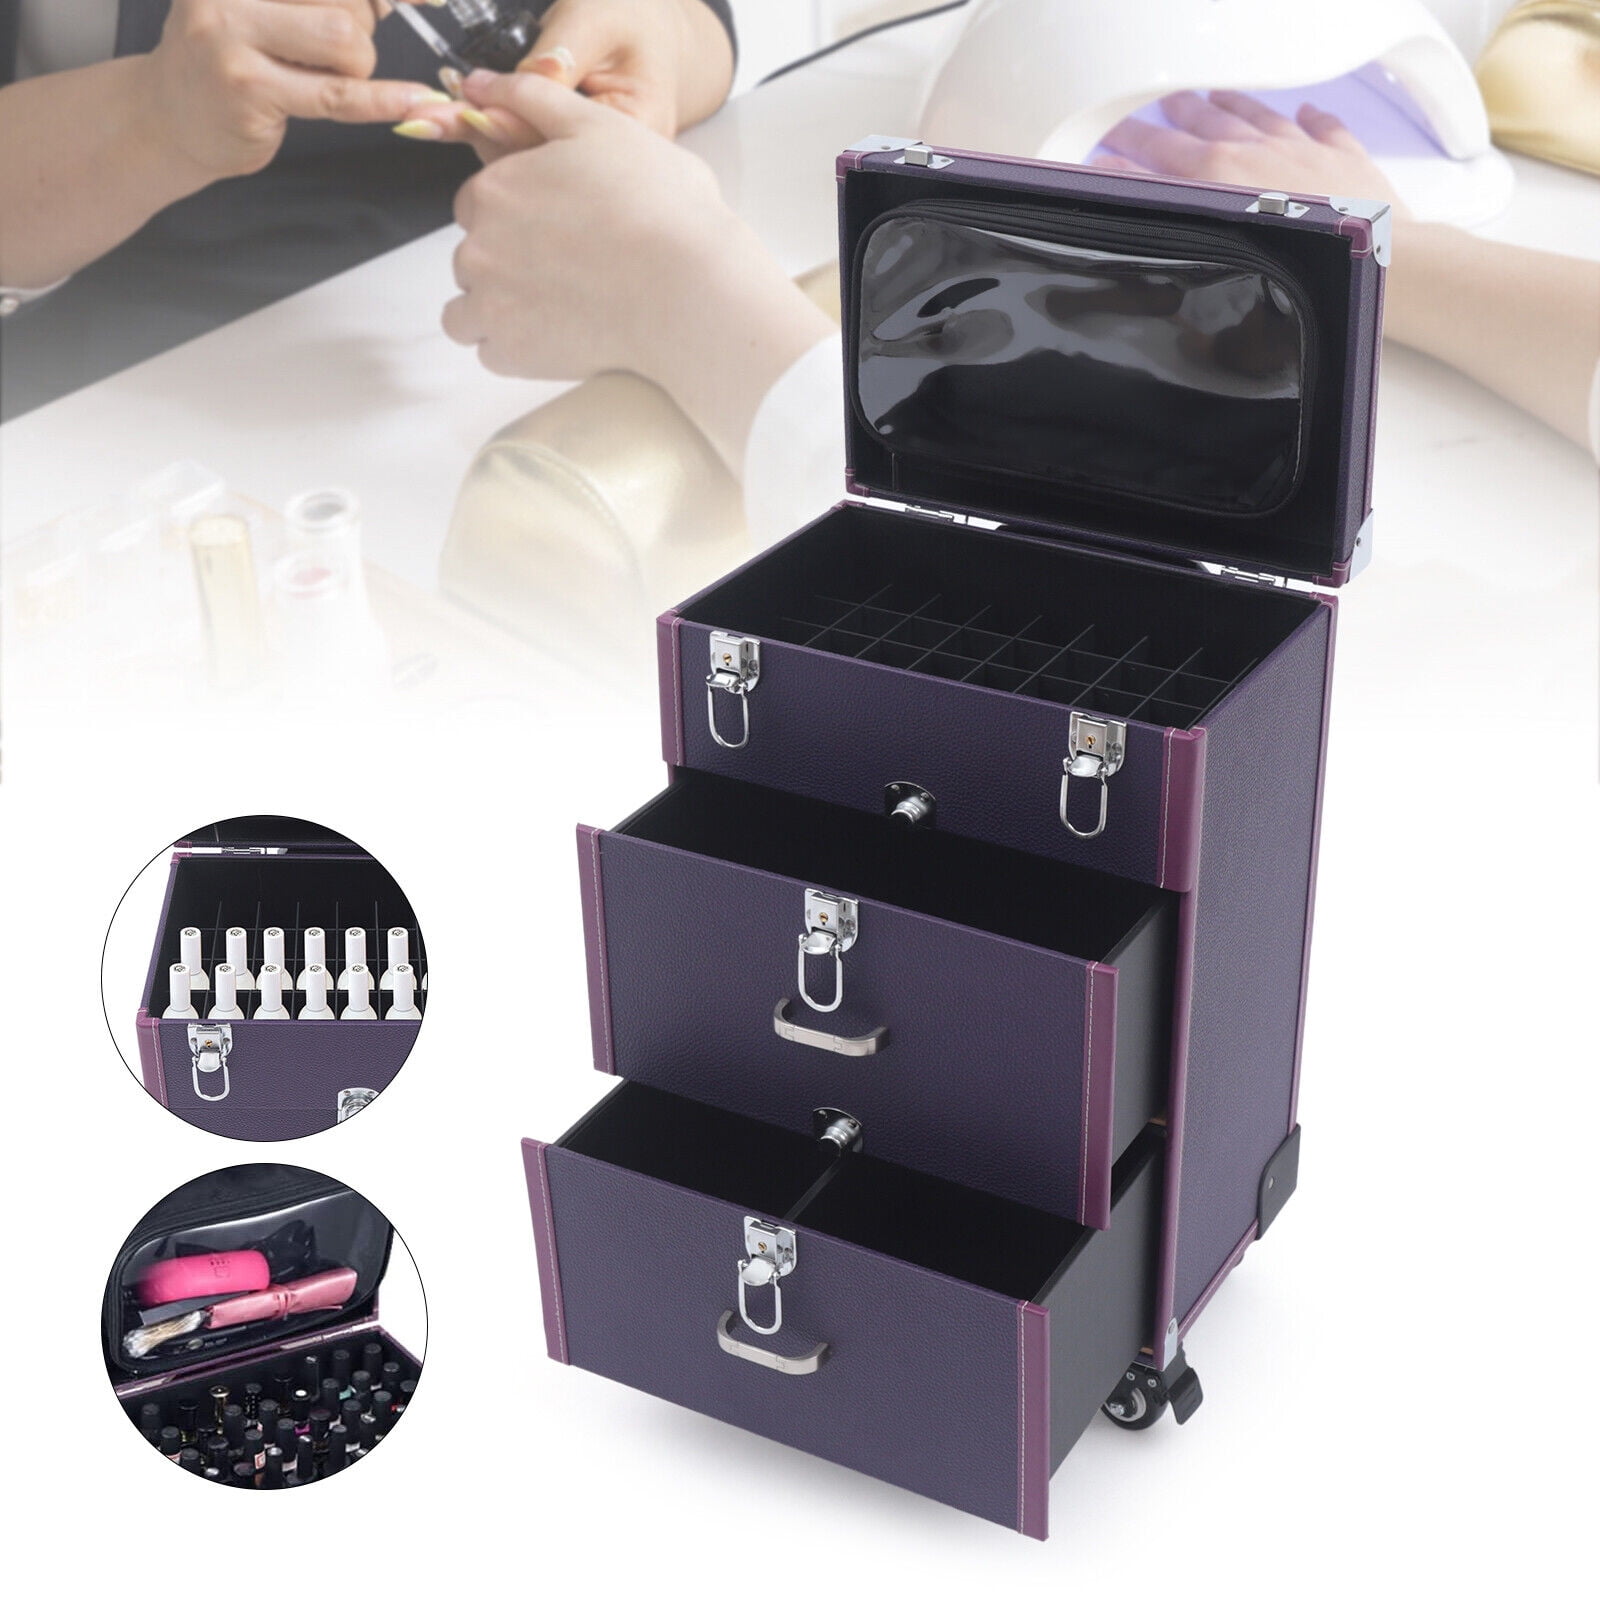 Byootique 2in1 Rolling Makeup Case Nail Polish Organizer Case  Rolling  makeup case, Nail polish organizer case, Makeup case